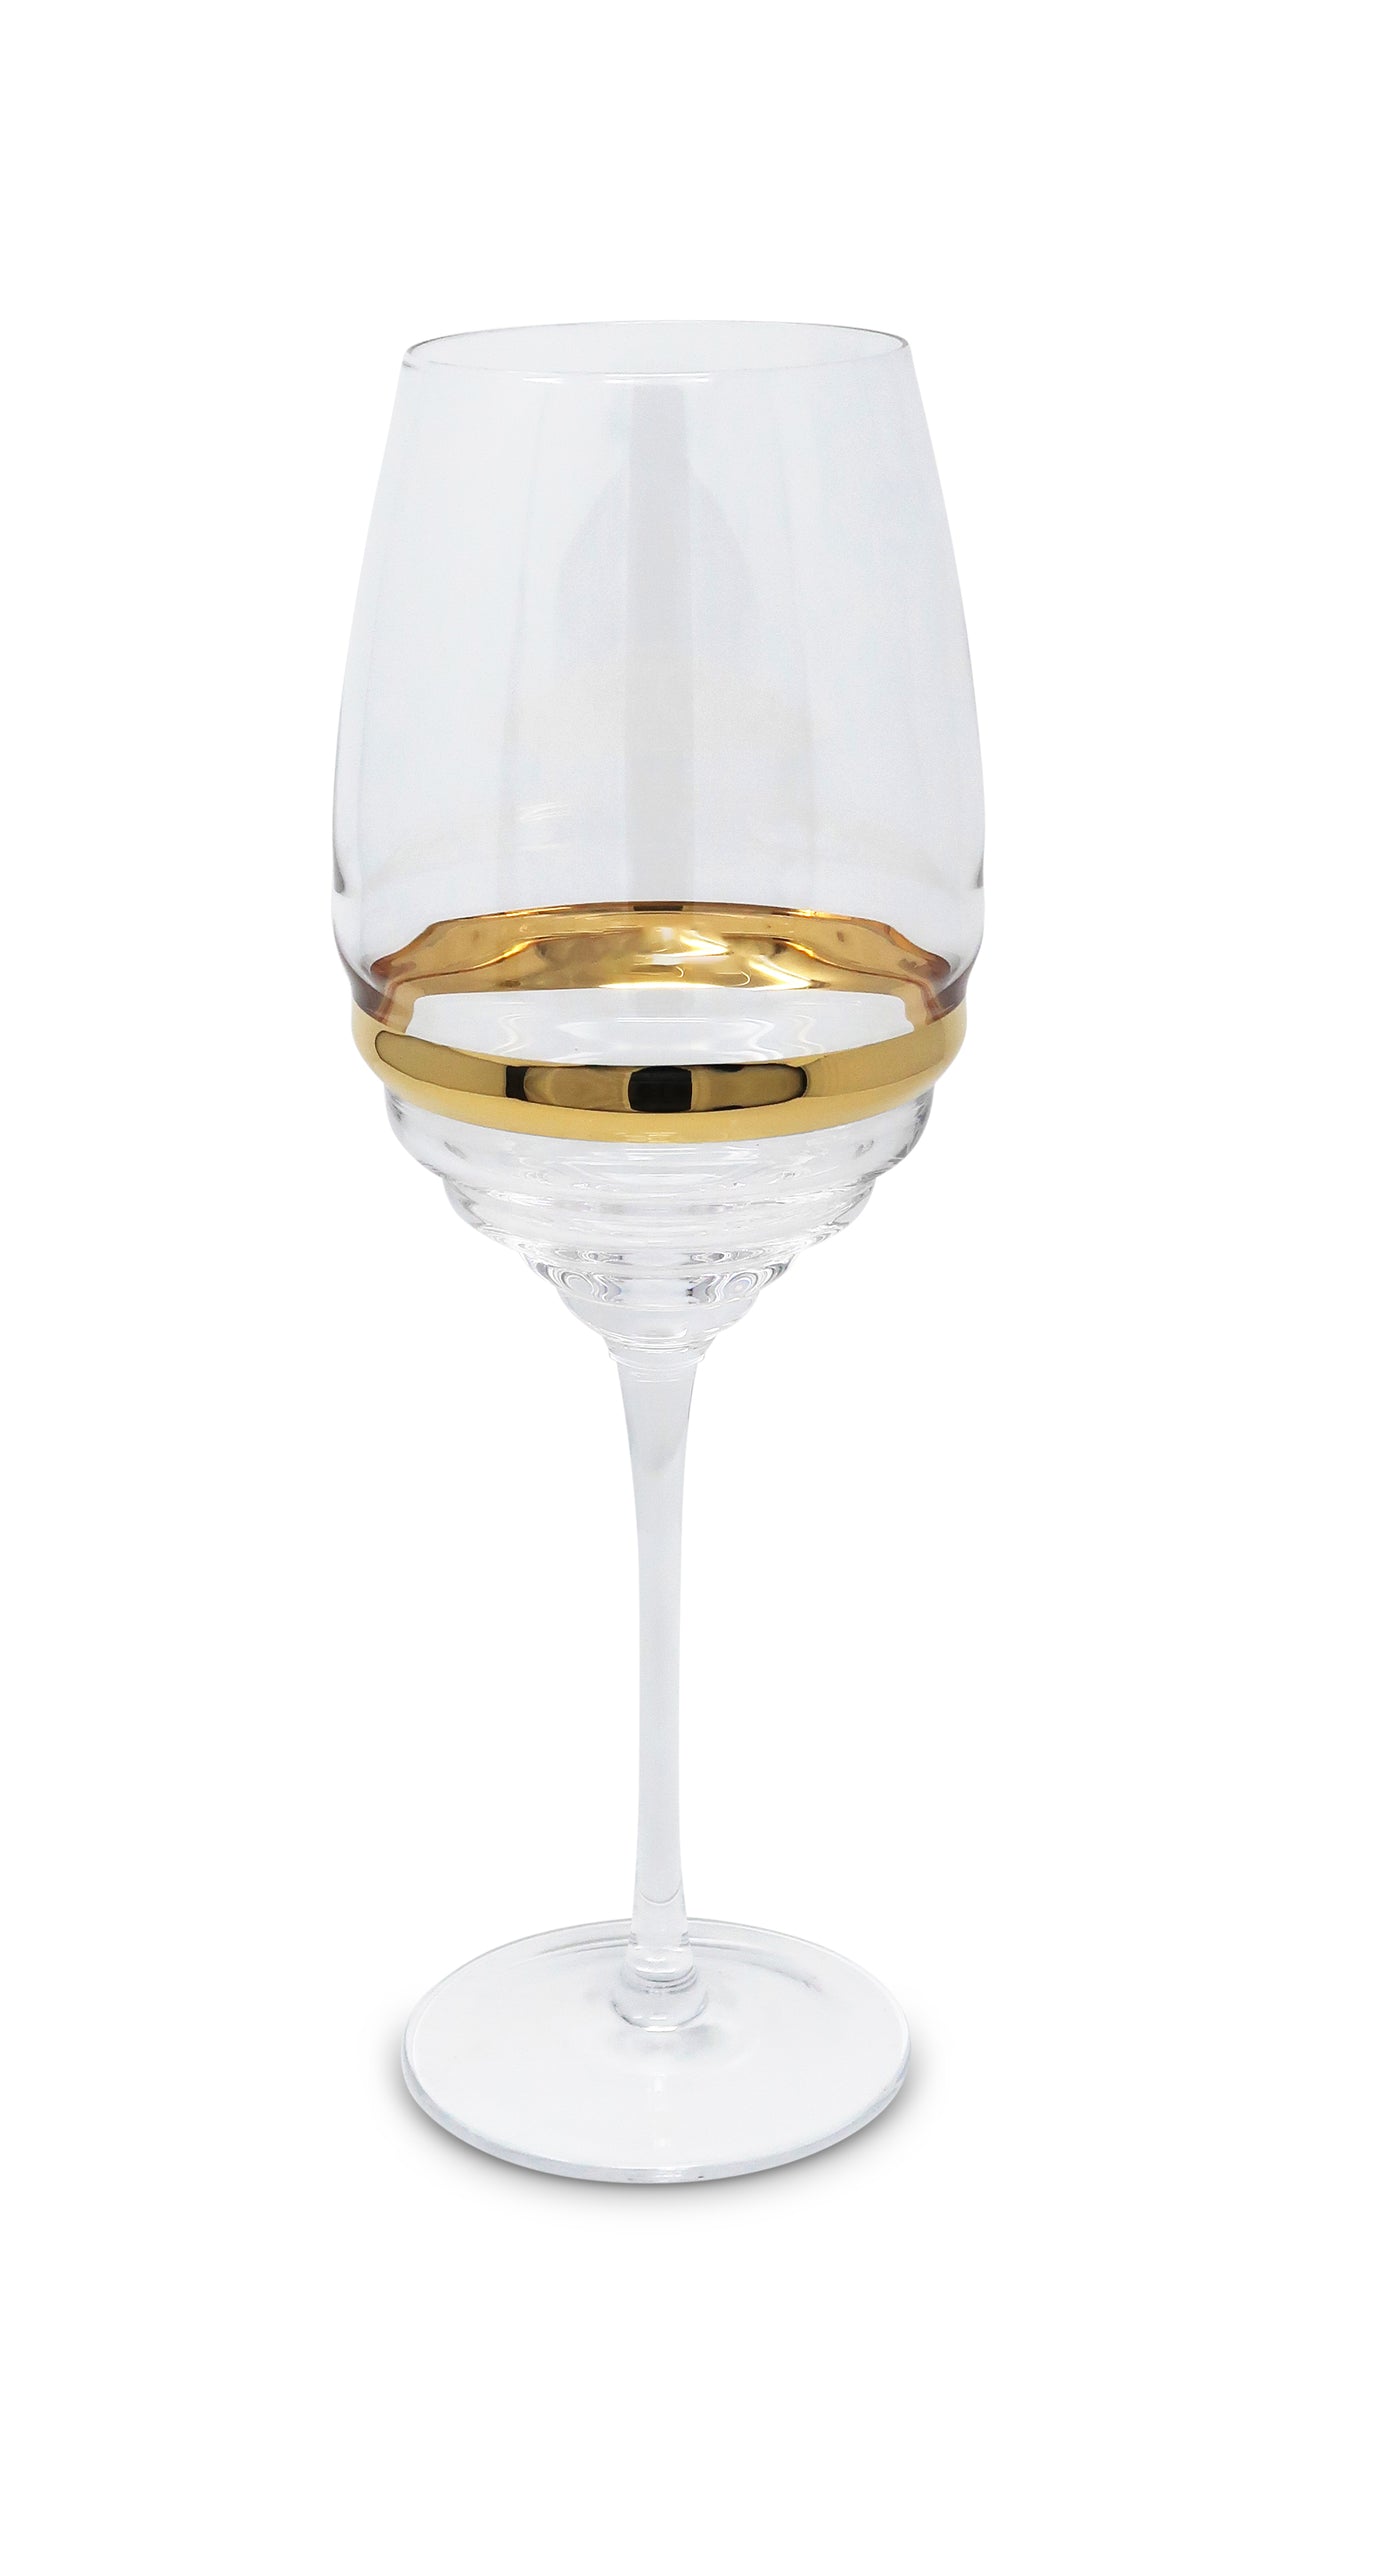 Set of 6 Glasses with Linear Design and Gold Stripe